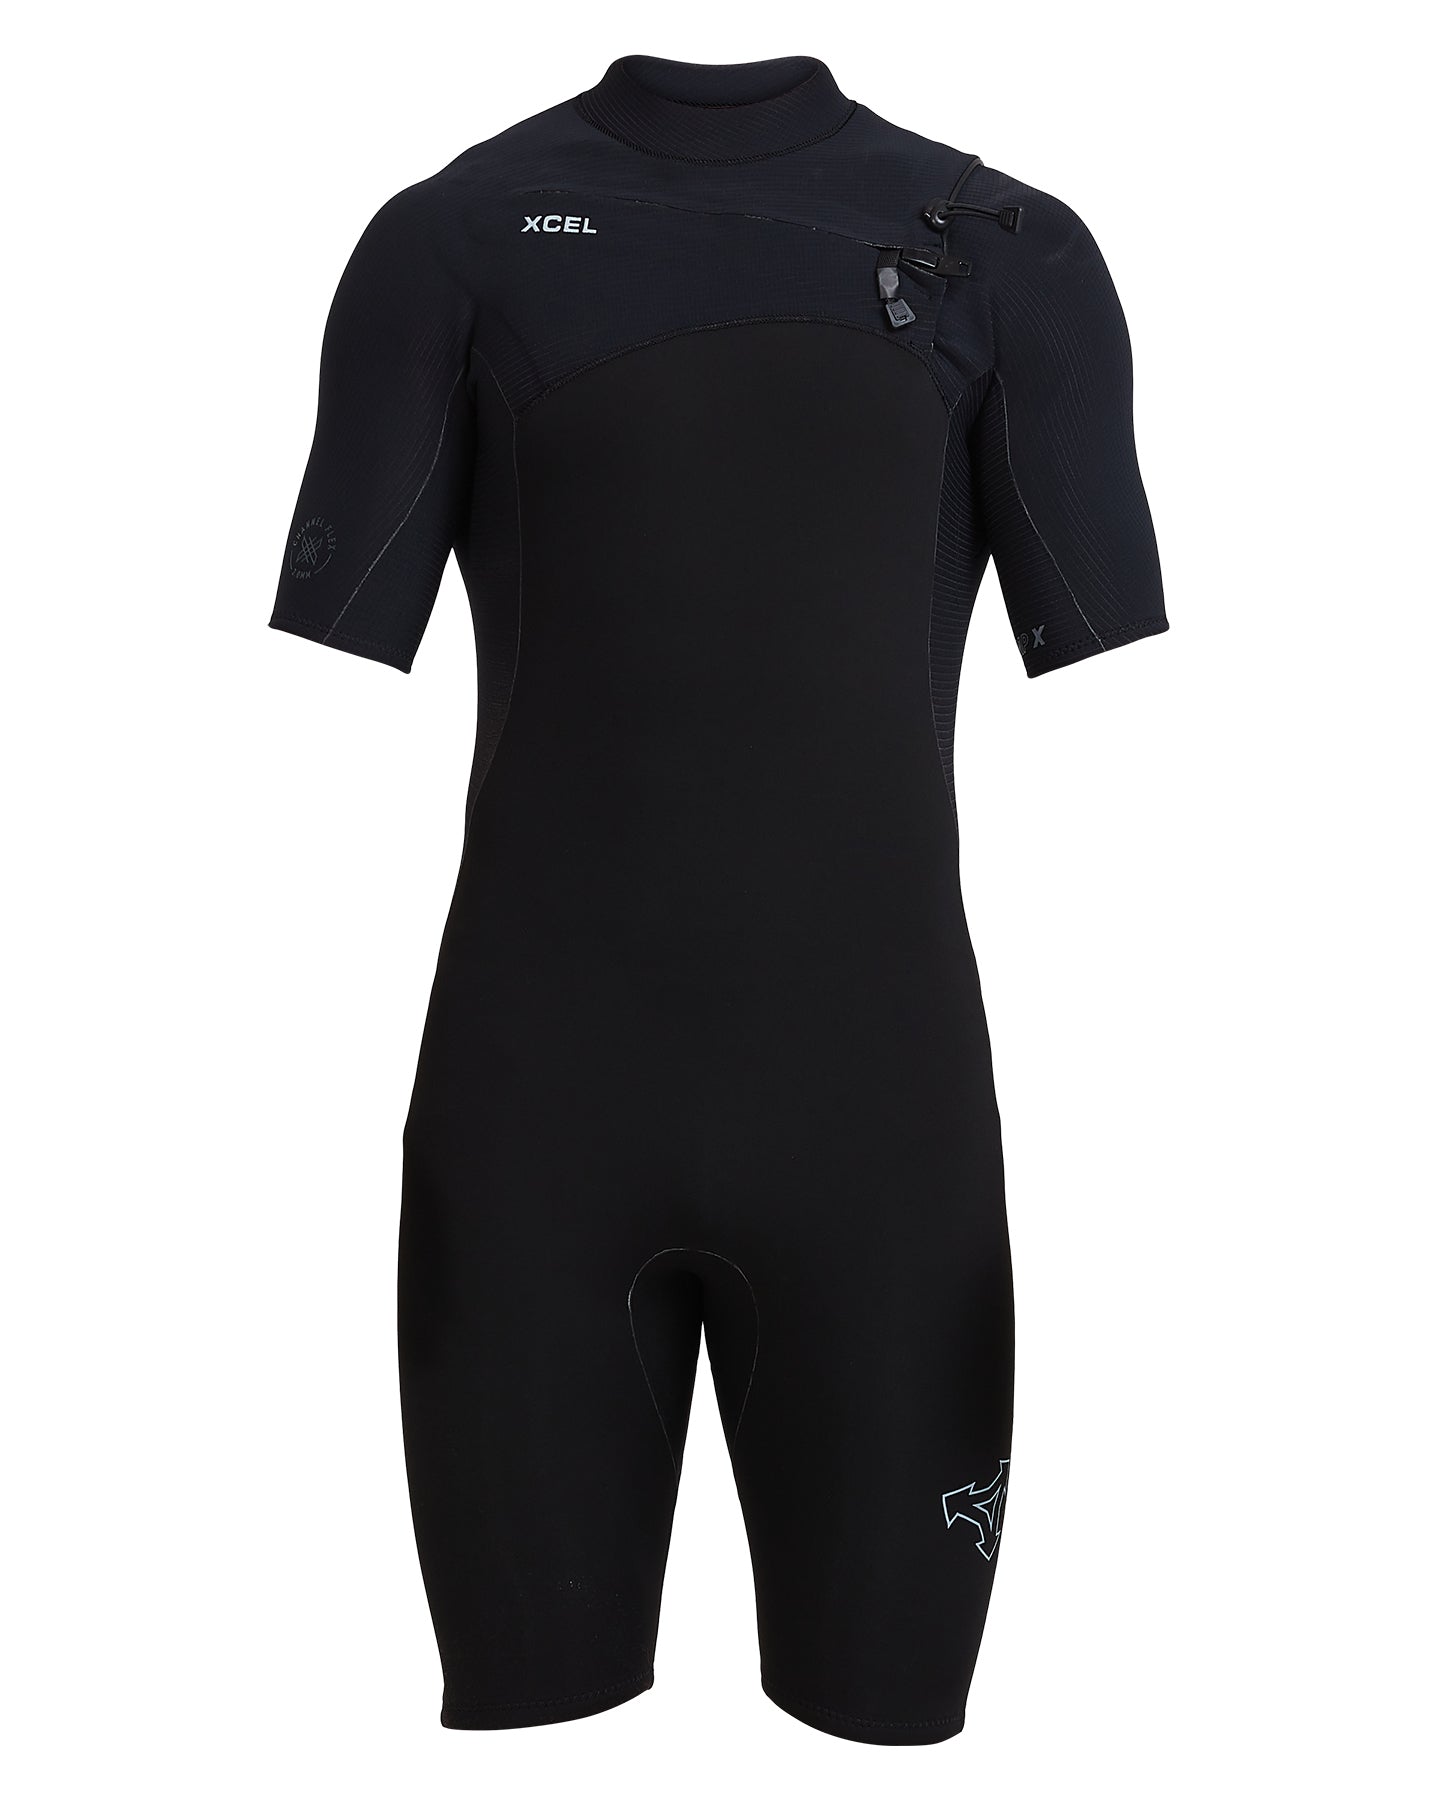 MENS COMP X 2MM SHORT SLEEVE SPRING SUIT - Board Store XcelWetsuits  